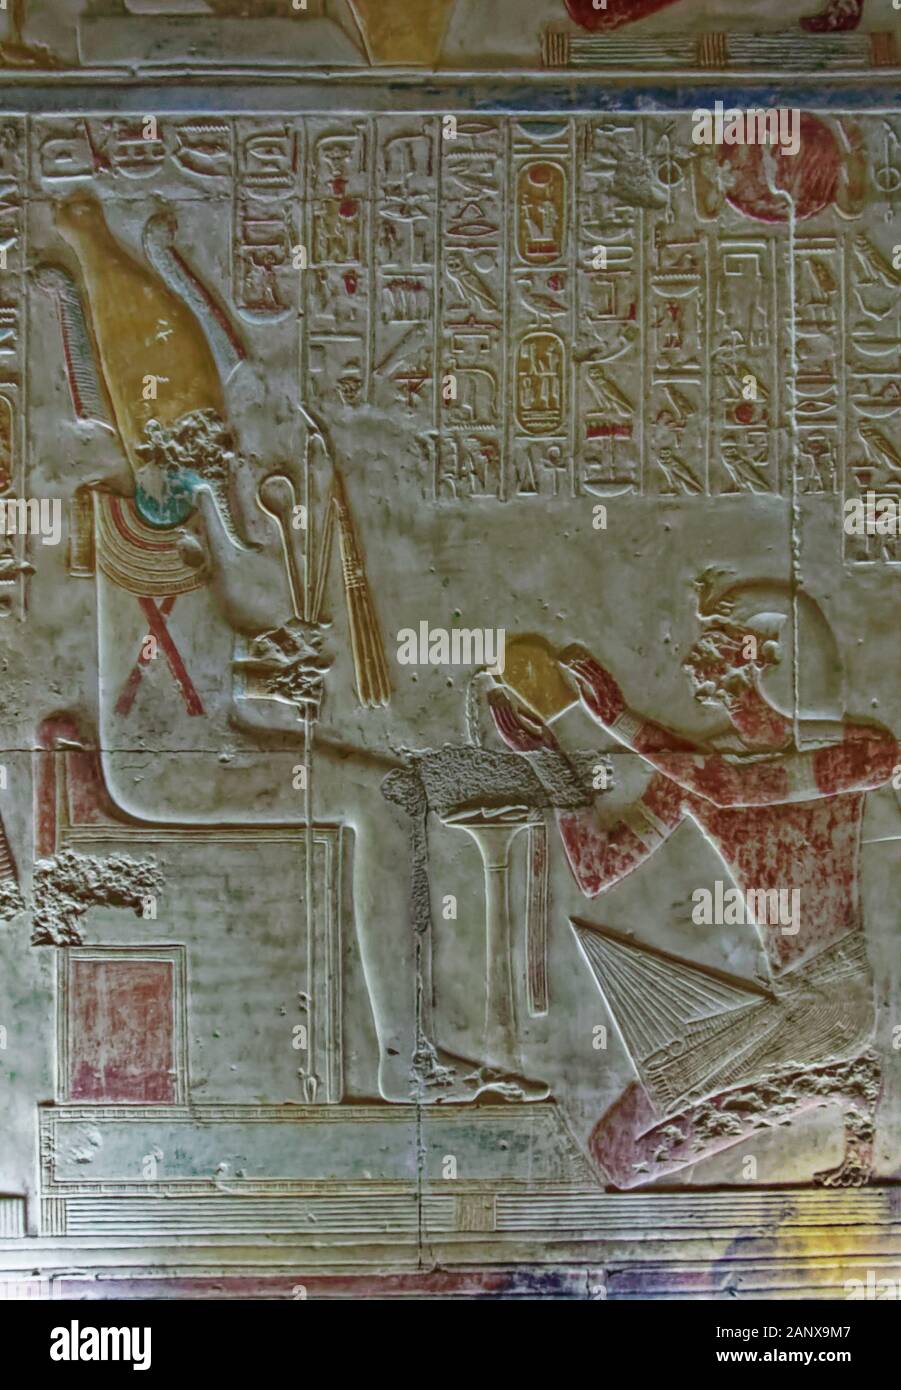 A frieze of Pharoah Seti offering libations to Osiris, from the North wall of the Chapel of Osiris at the Abydos Temple of King Seti I Stock Photo